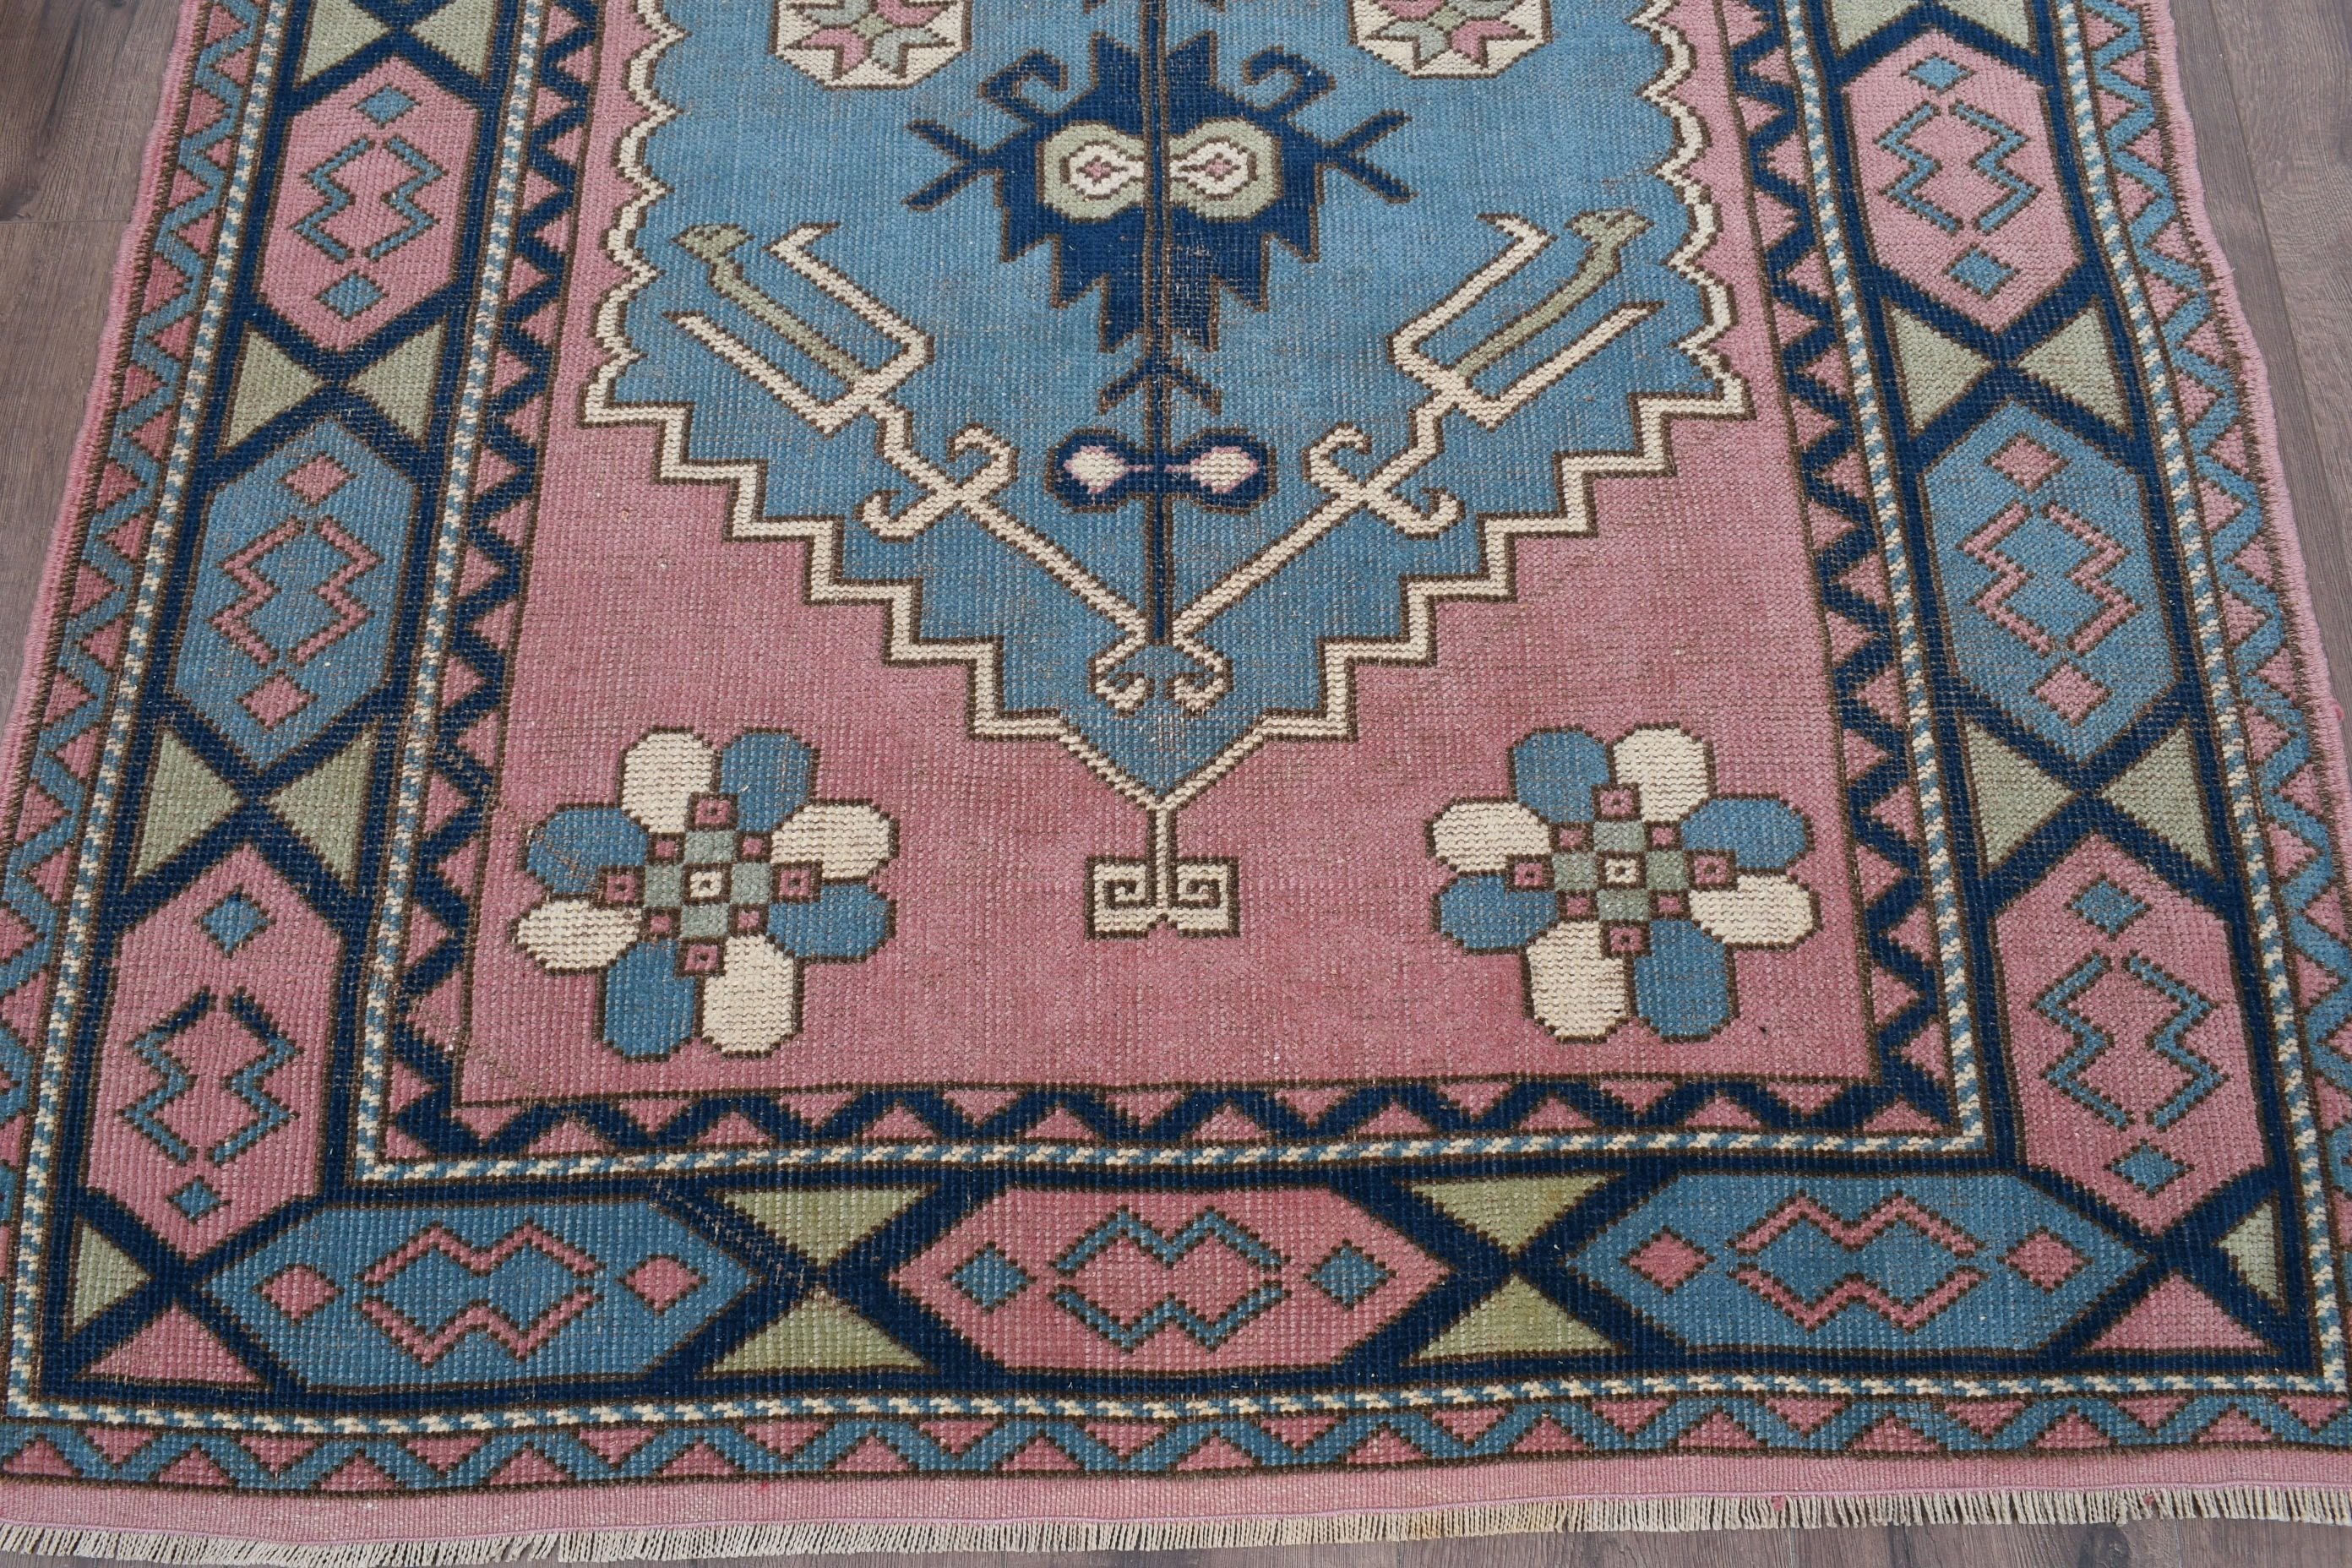 Vintage Rug, Pink Kitchen Rug, Anatolian Rug, 4.3x7 ft Area Rug, Bedroom Rugs, Hand Woven Rugs, Indoor Rugs, Rugs for Area, Turkish Rugs